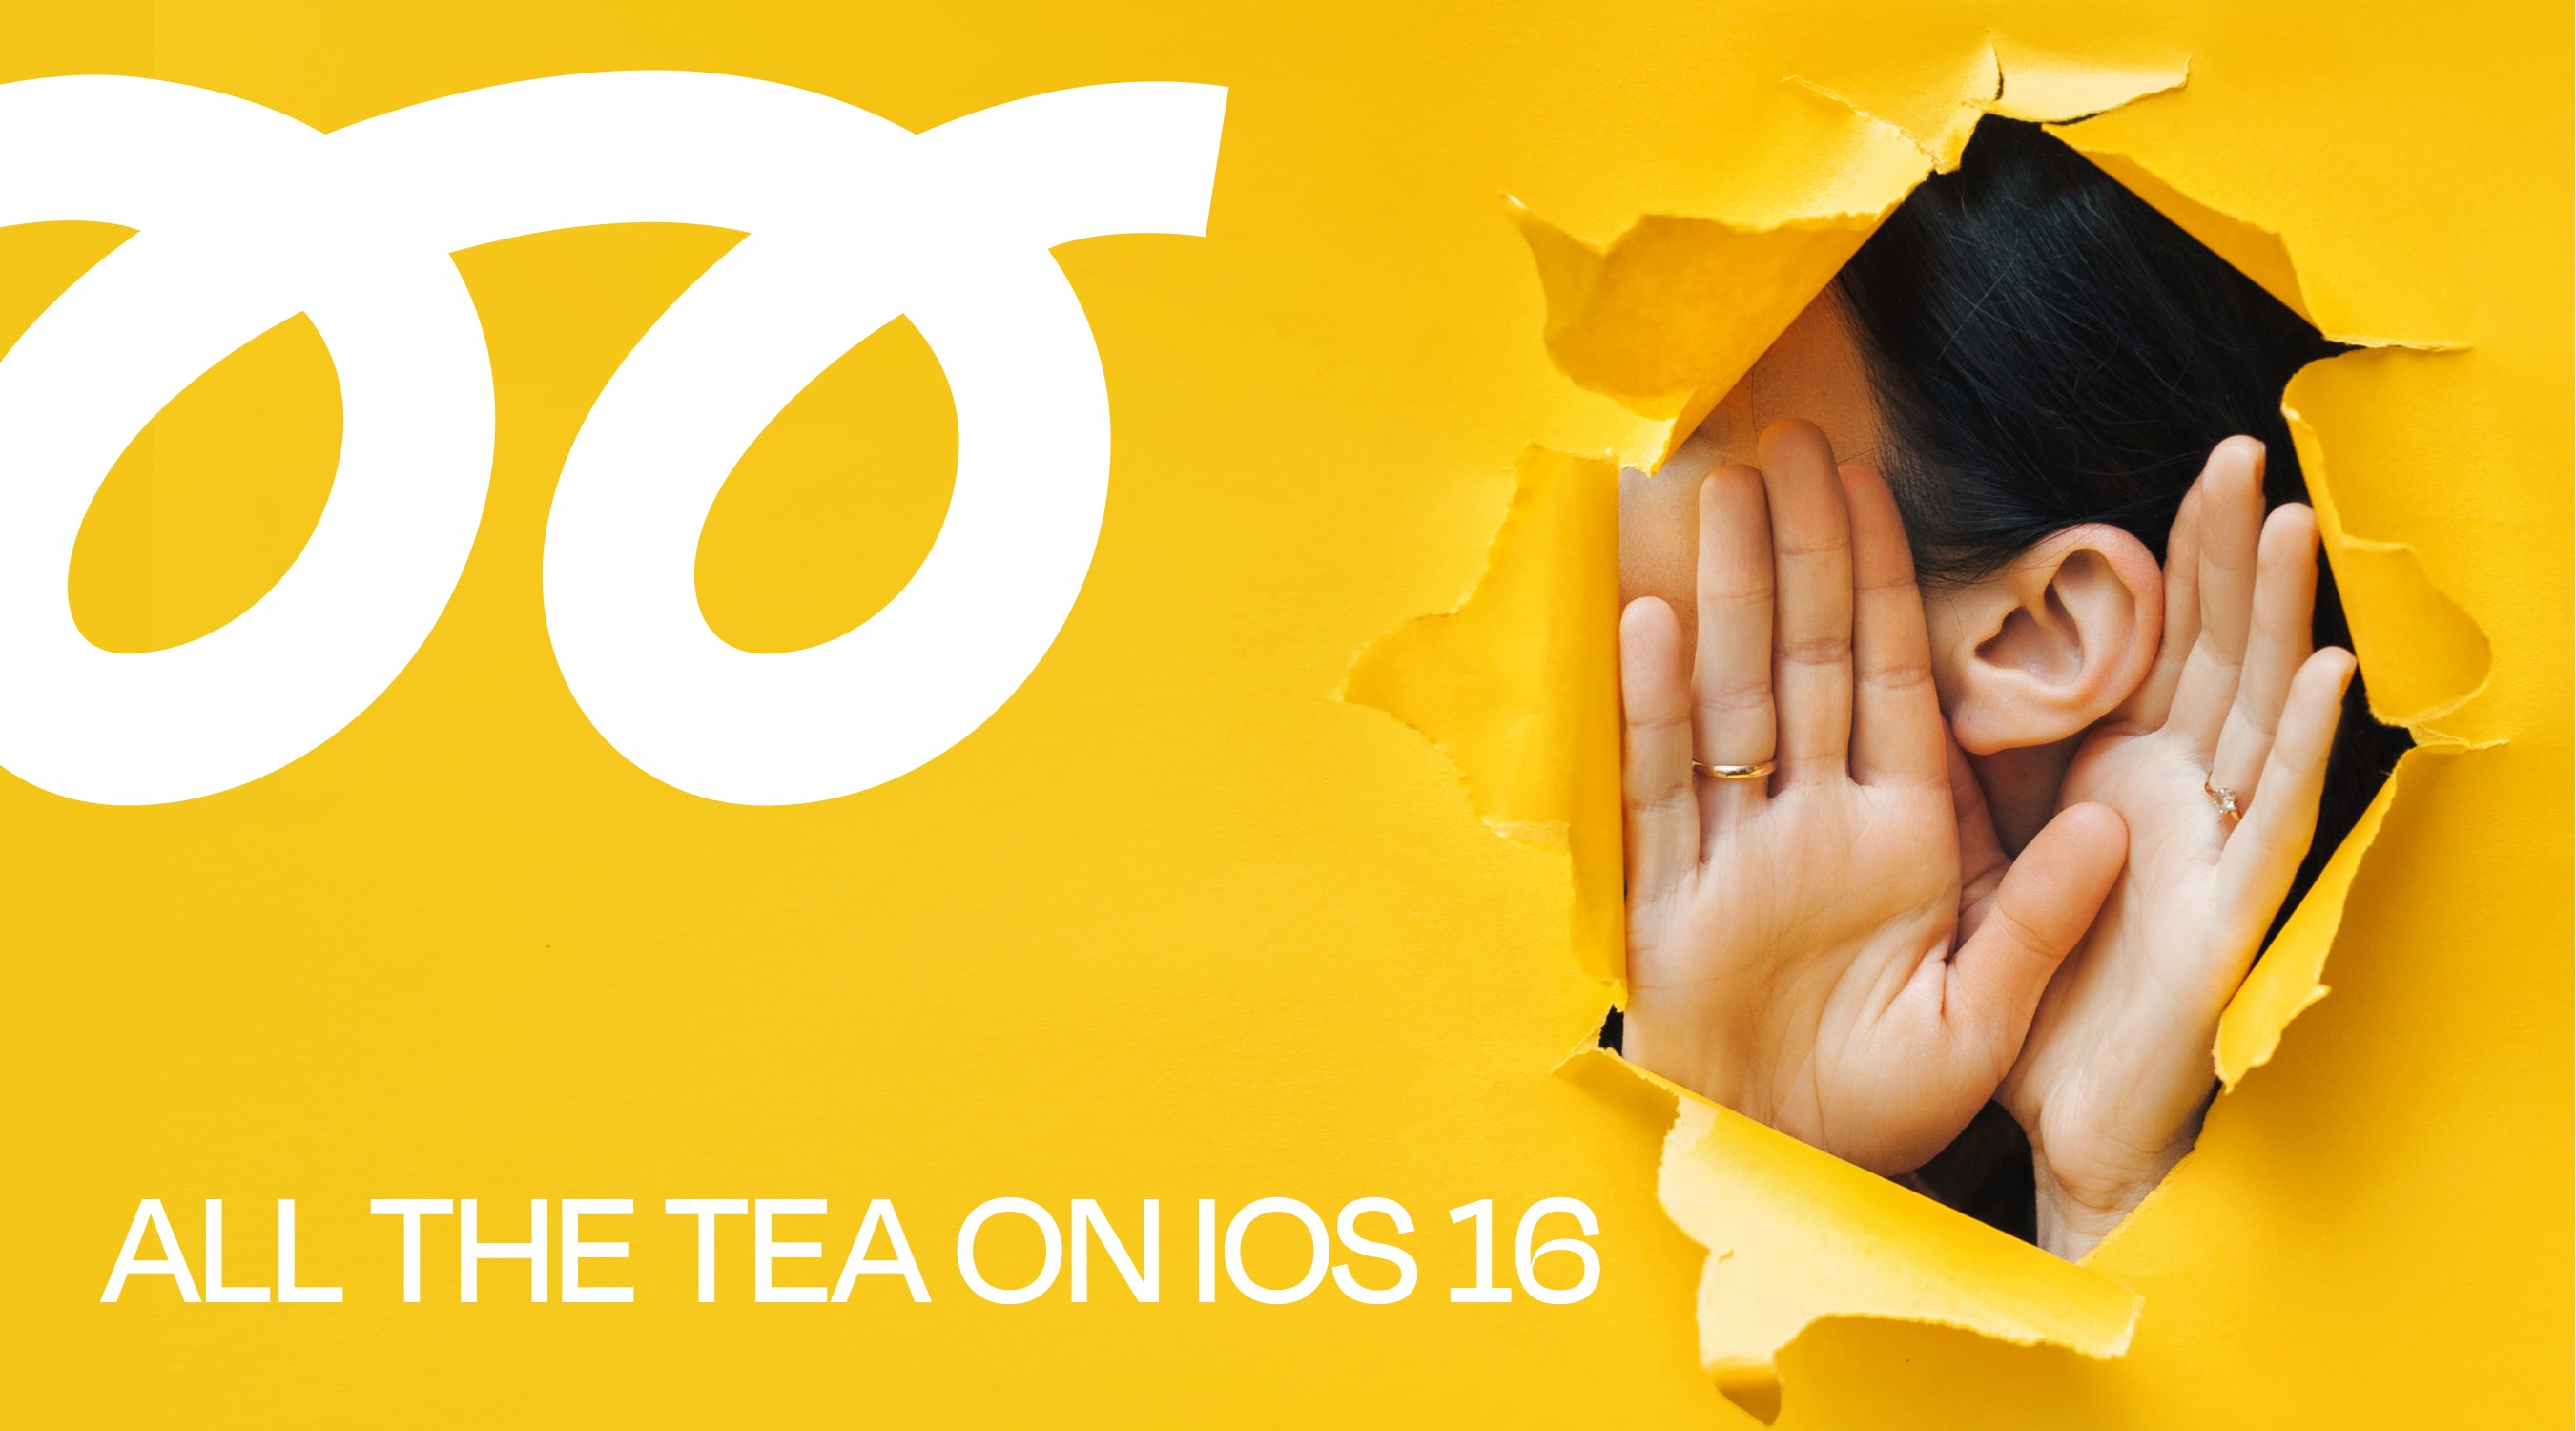 All the Tea on iOS 16: What to Expect from the Newest iPhone Operating System